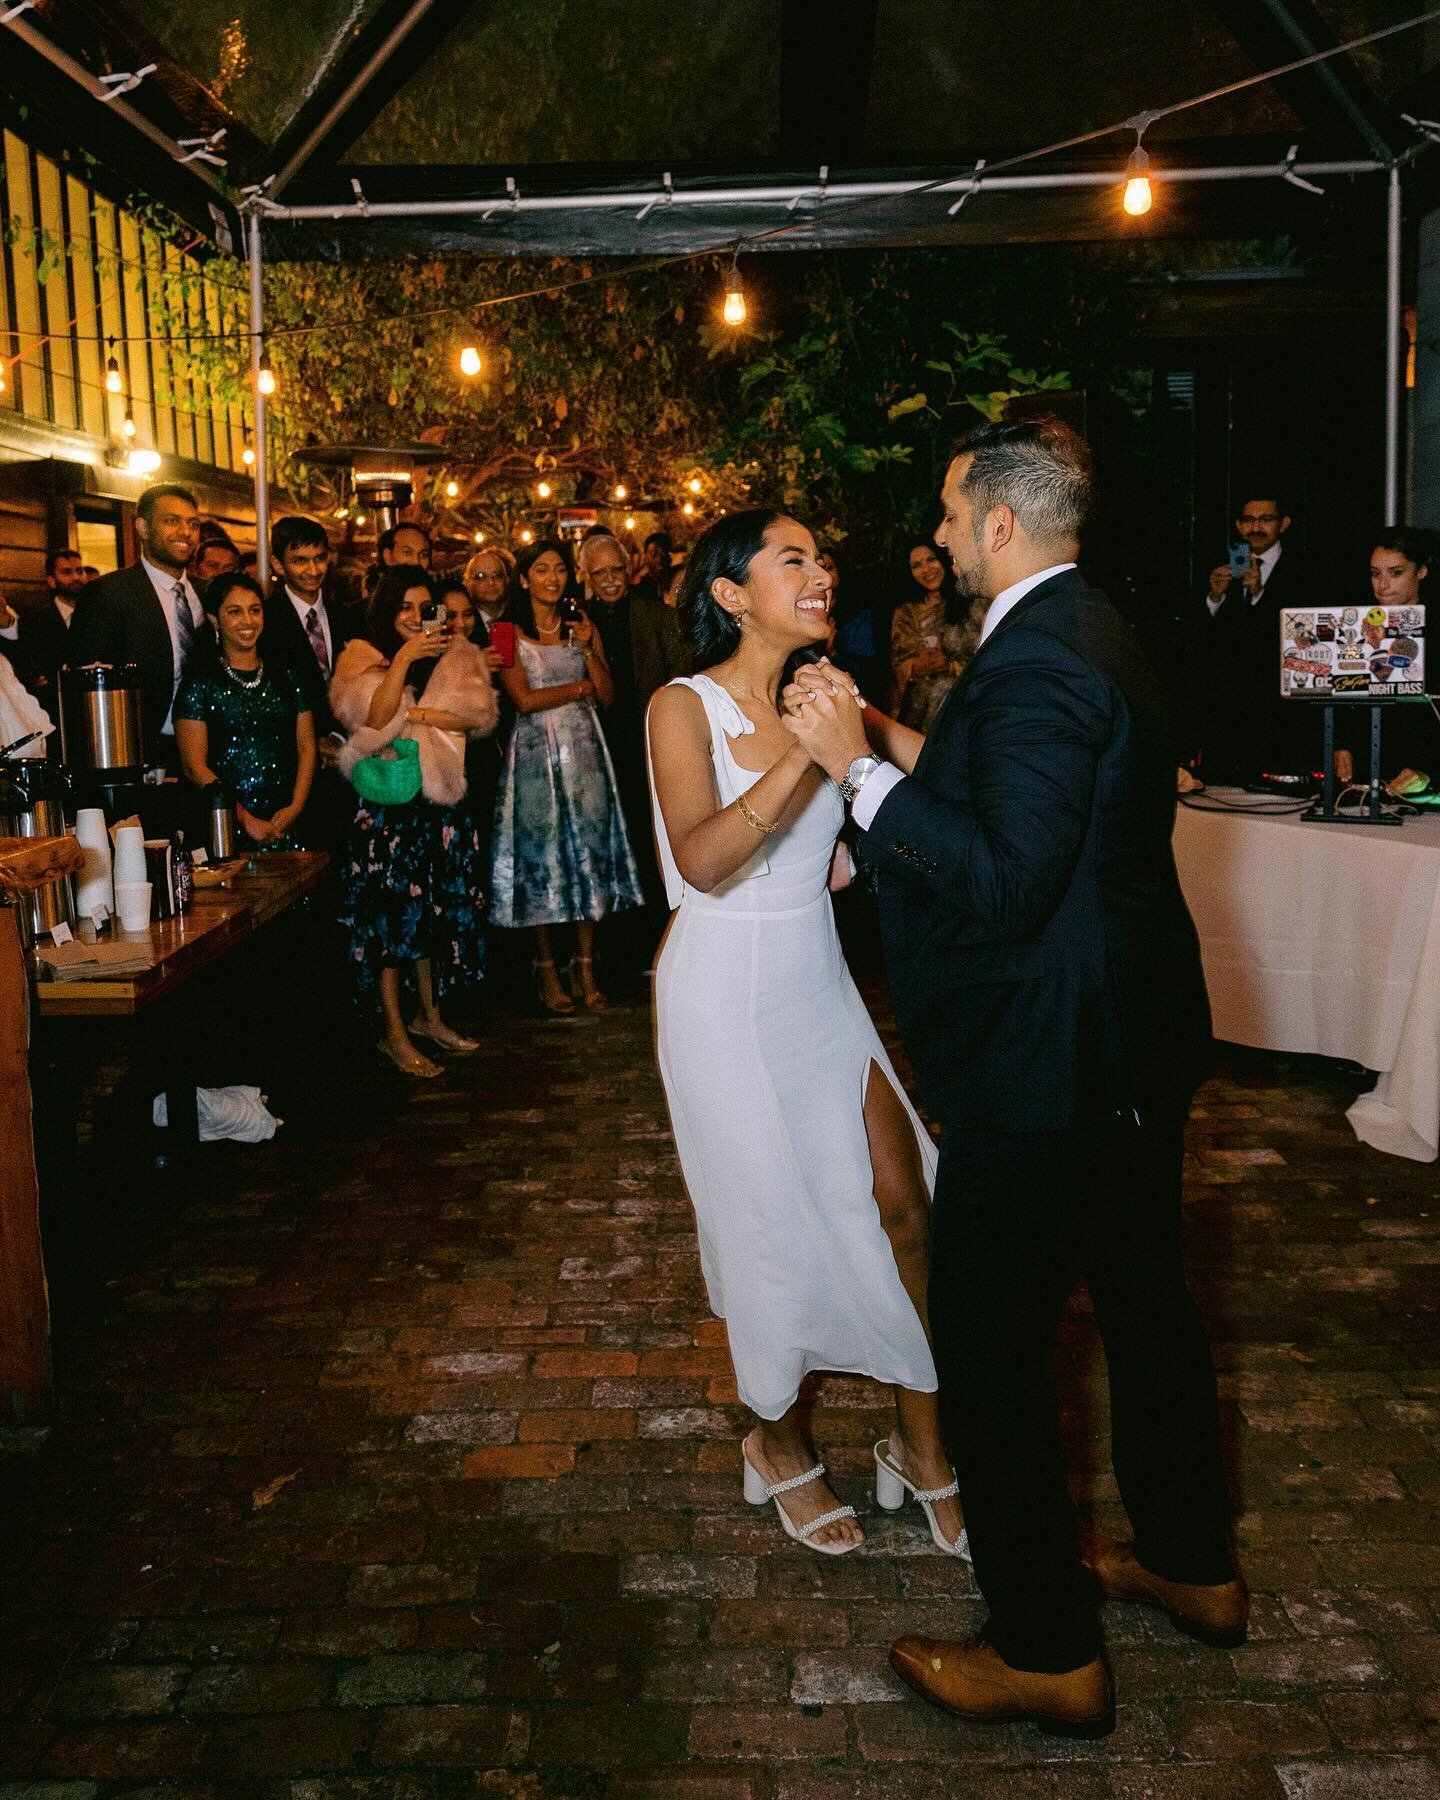 &ldquo;DJ Ray was phenomenal for our wedding reception! From the beginning, they were invested in curating mixes to match me and my wife&rsquo;s relationship vibe. DJ Ray was extremely organized and responsive, making adjustments and giving great adv